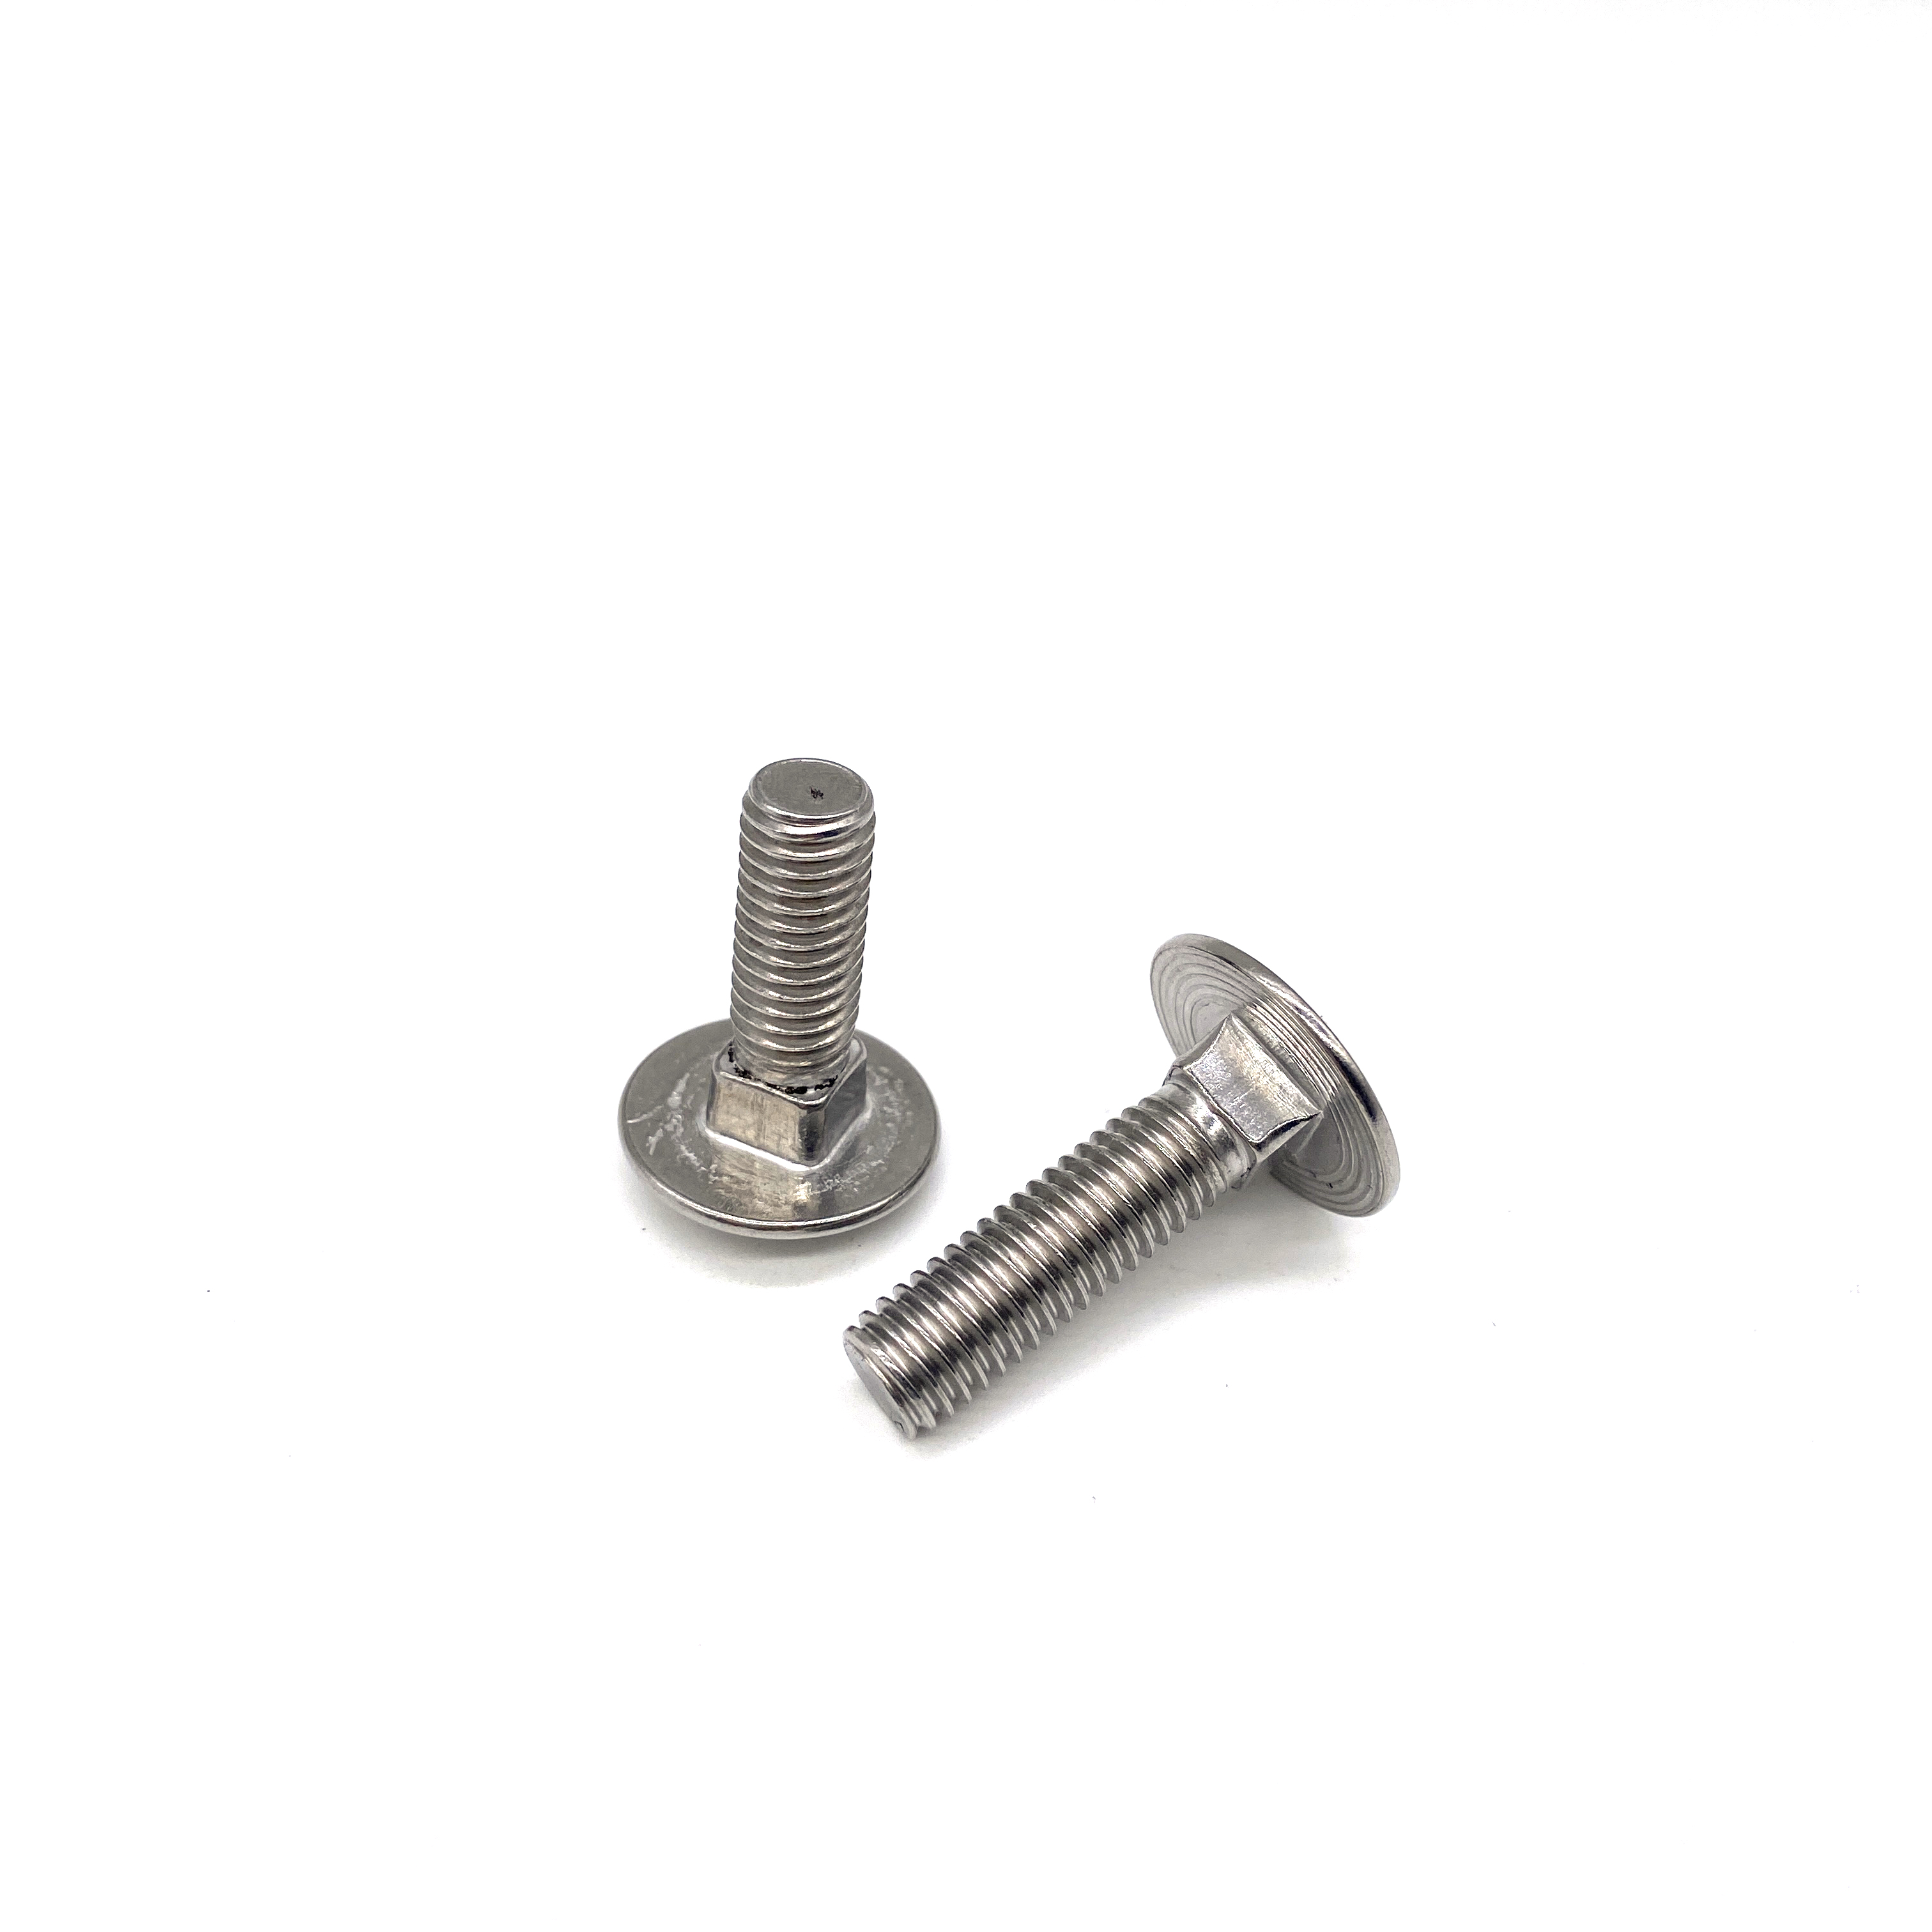 DIN603 Stainless Steel A4-70 SS316 Round Head Square Neck Carriage Bolts